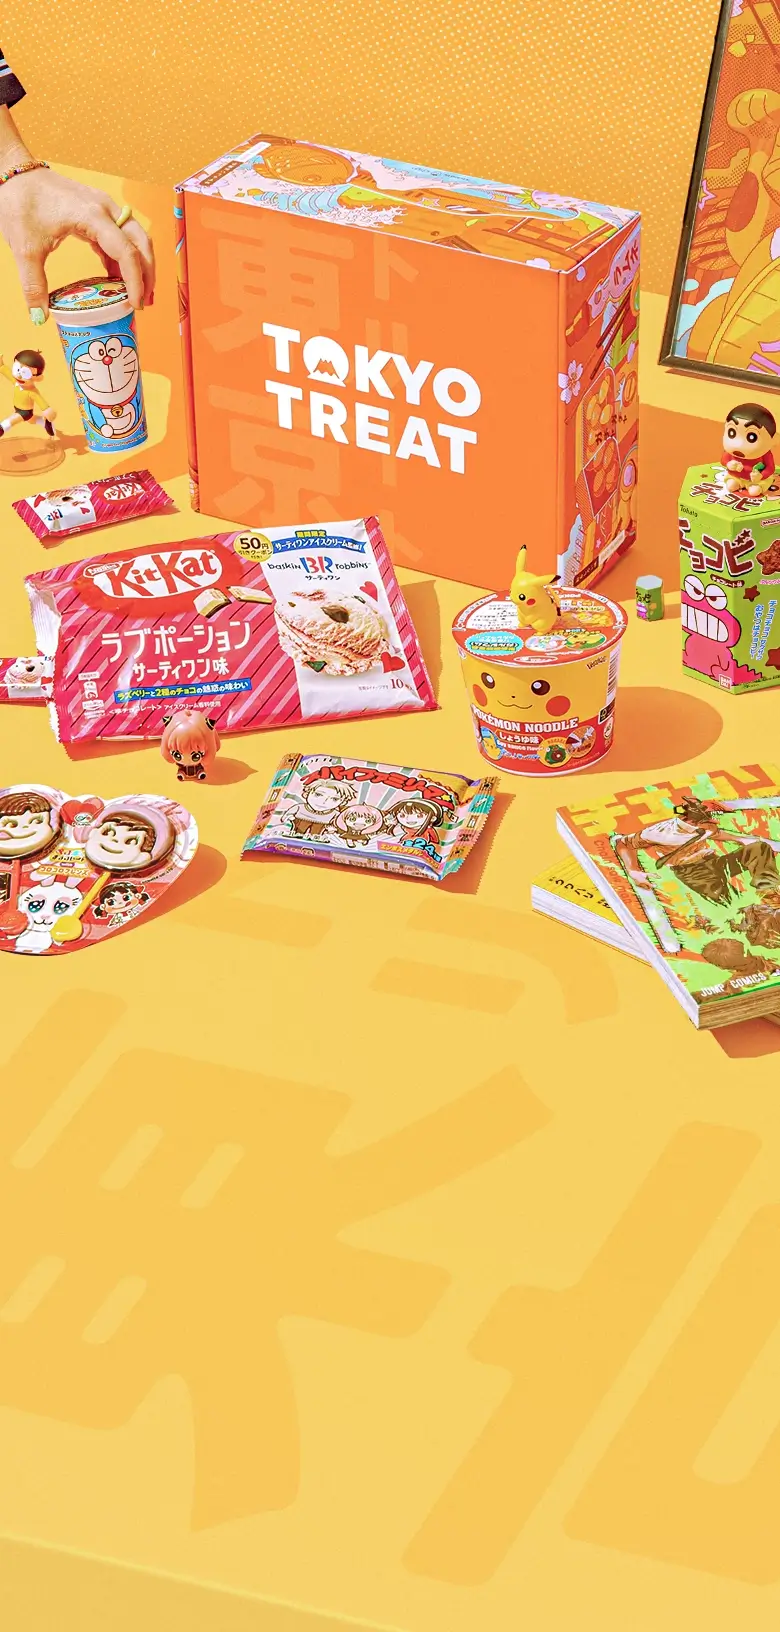 TokyoTreat box sits on a bright orange-yellow background, surrounded by Japanese snacks, with one hand reaching for a snack.